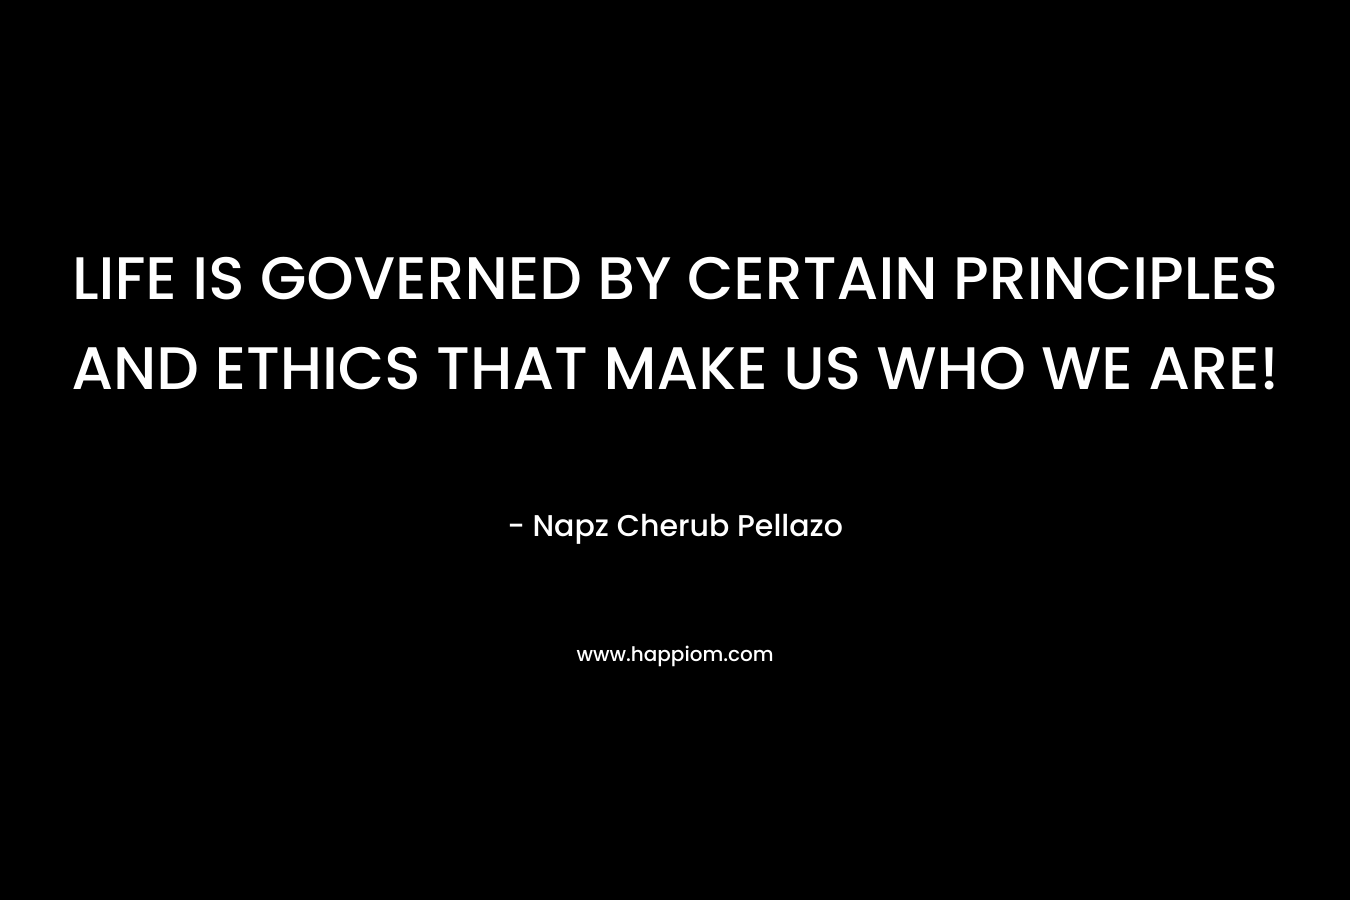 LIFE IS GOVERNED BY CERTAIN PRINCIPLES AND ETHICS THAT MAKE US WHO WE ARE! – Napz Cherub Pellazo